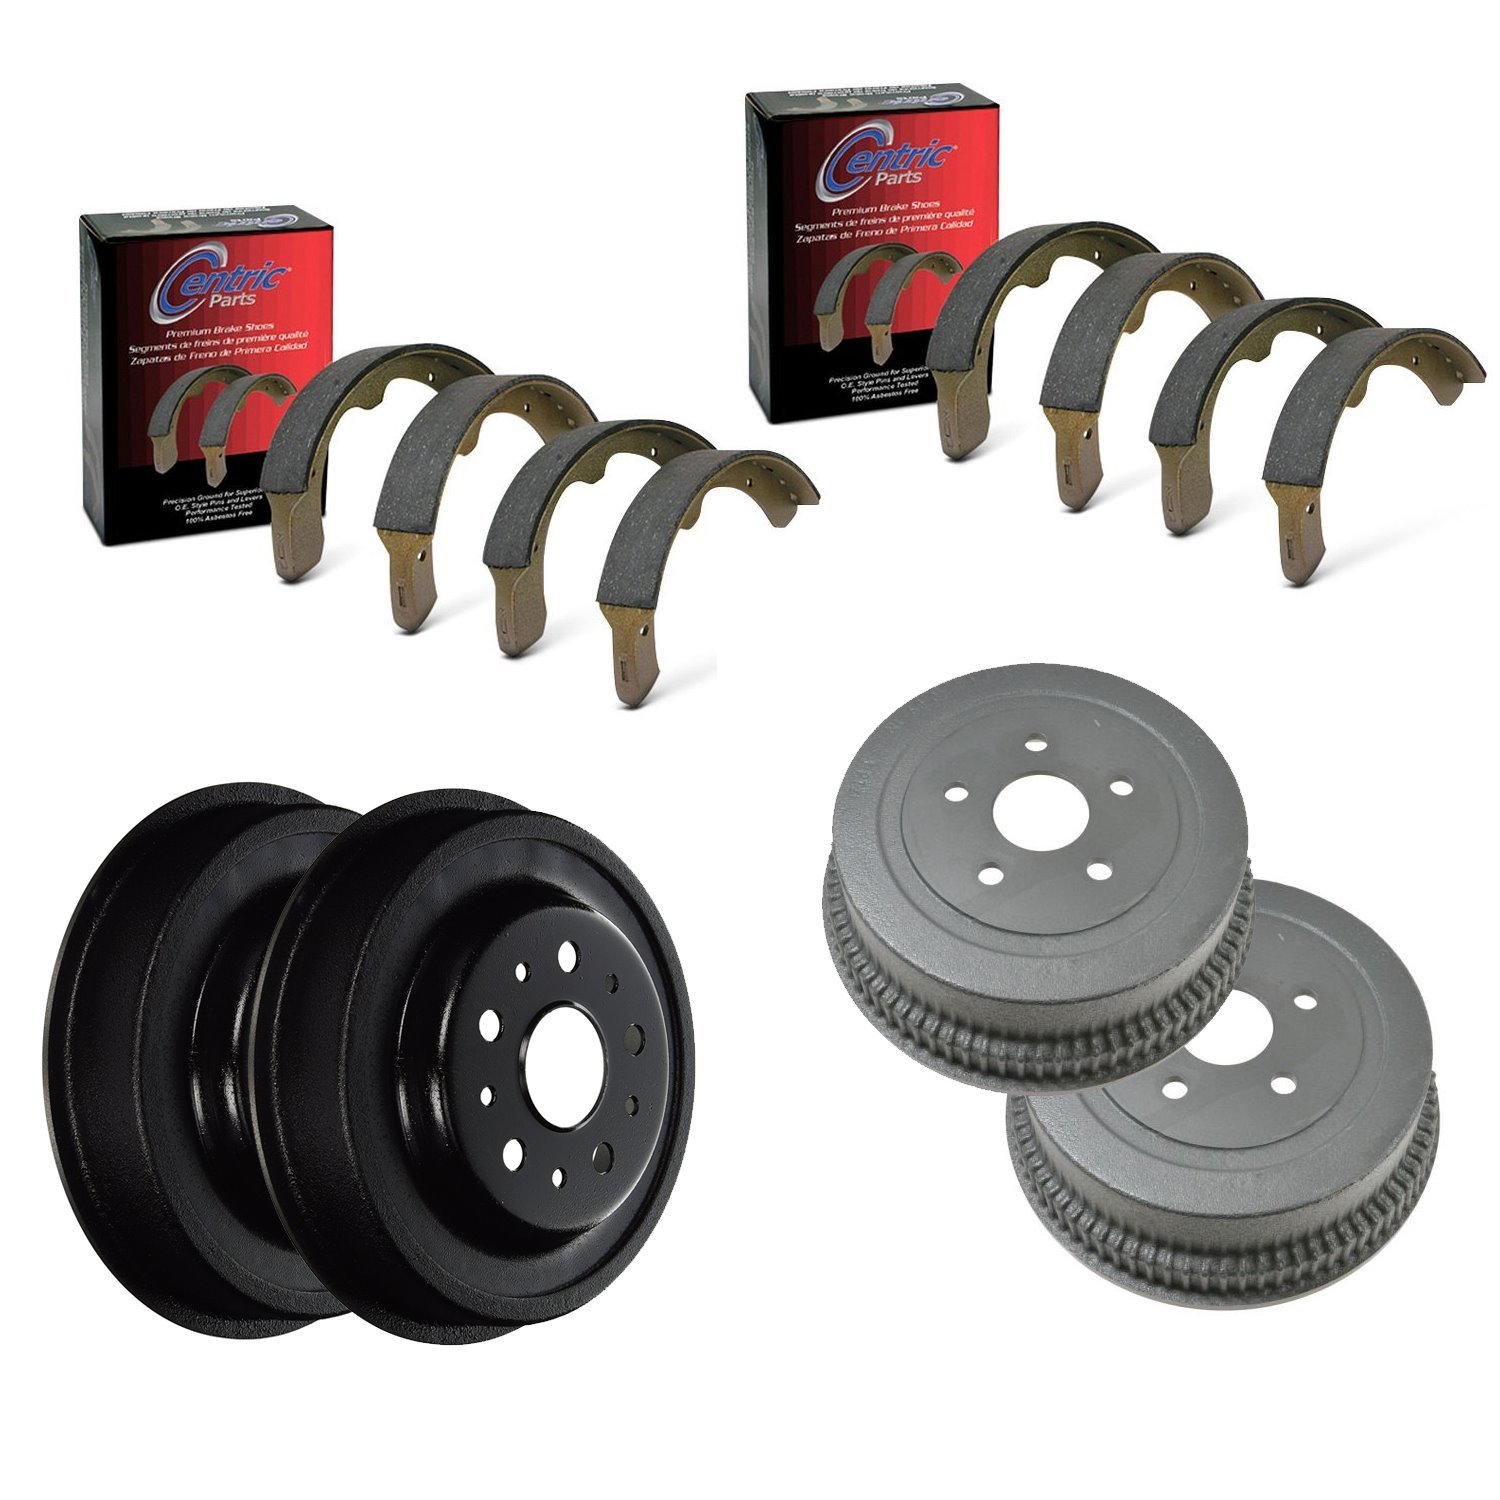 Centric Front Drum/Rear Drum Brake Kit for 1967-1973 Ford Mustang